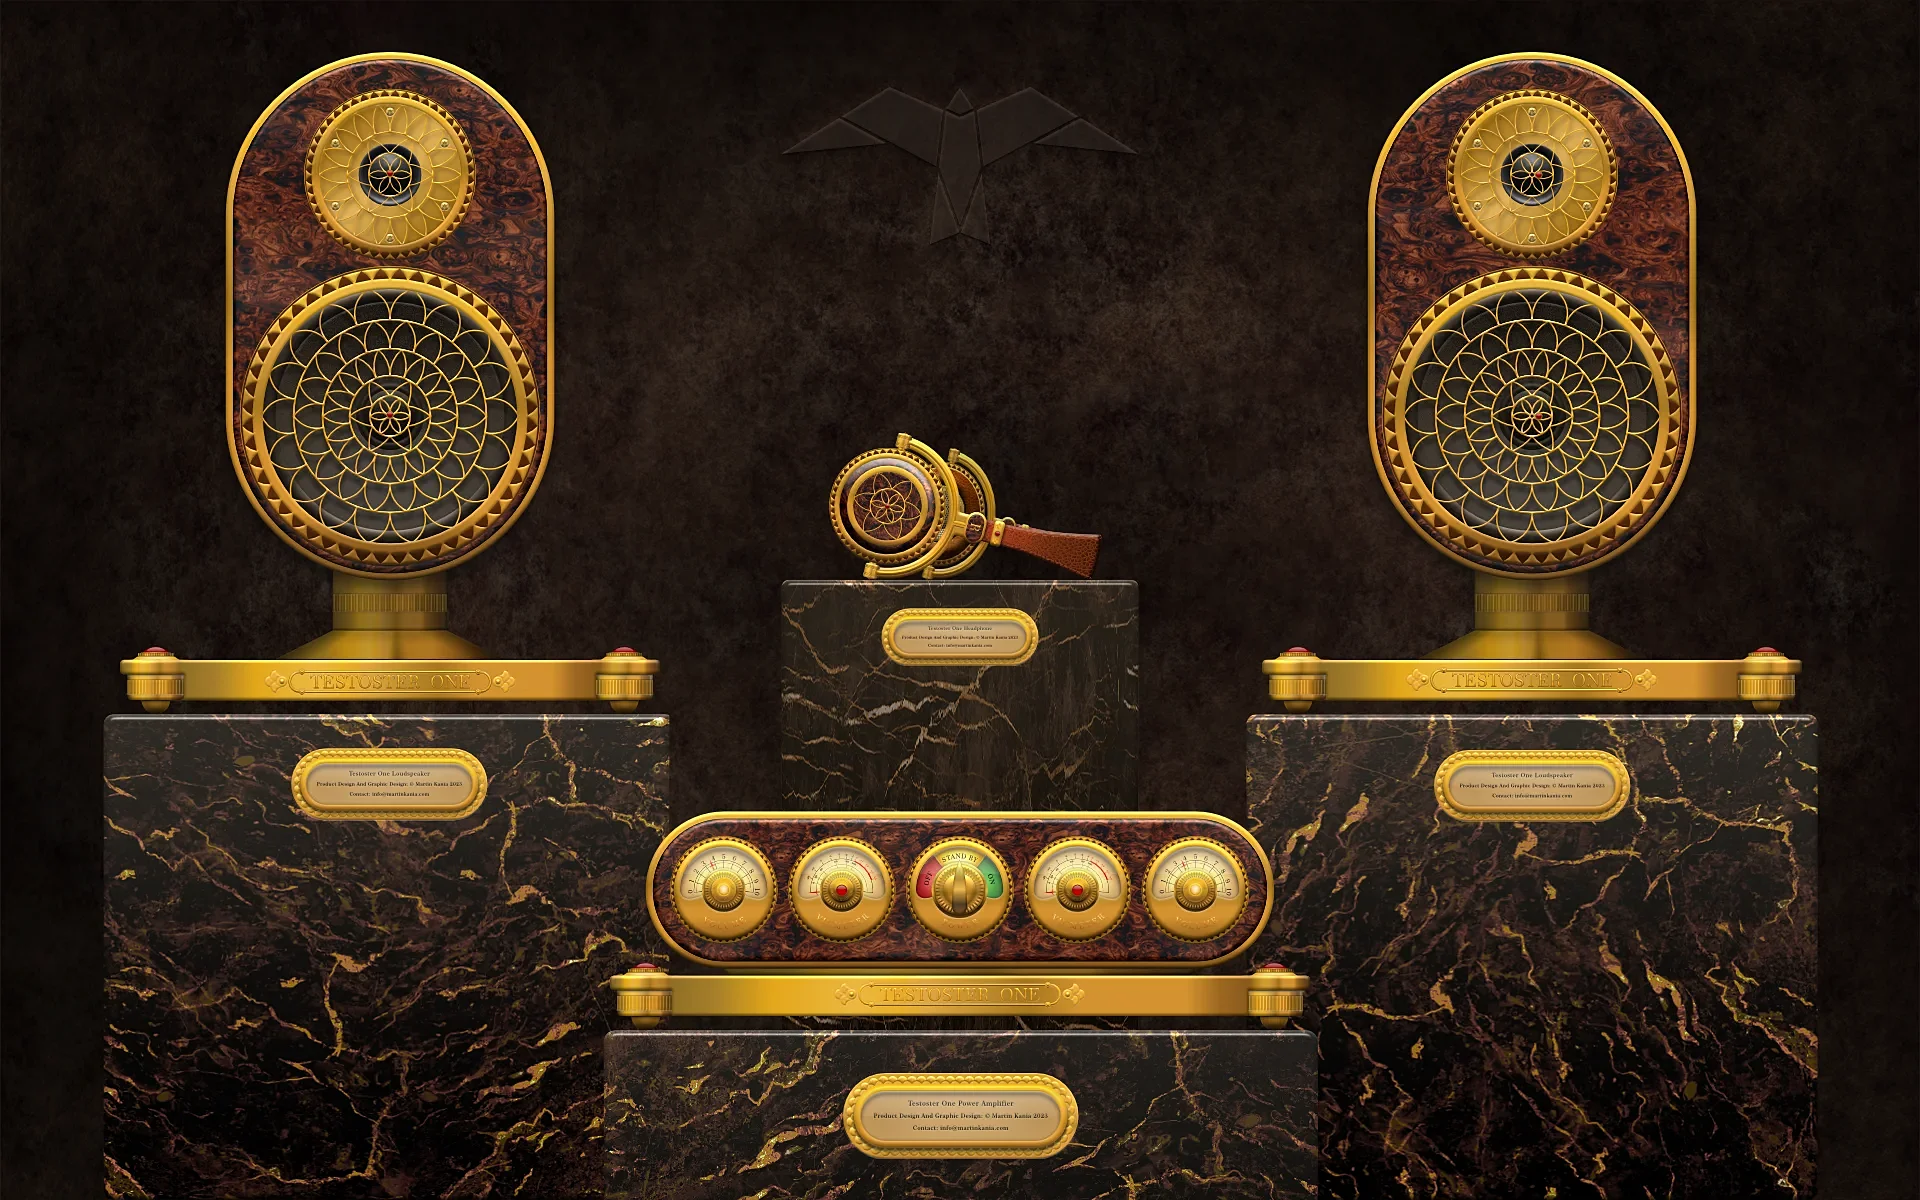 Hi-Fi system with a hint of steampunk - Martin Kania Design